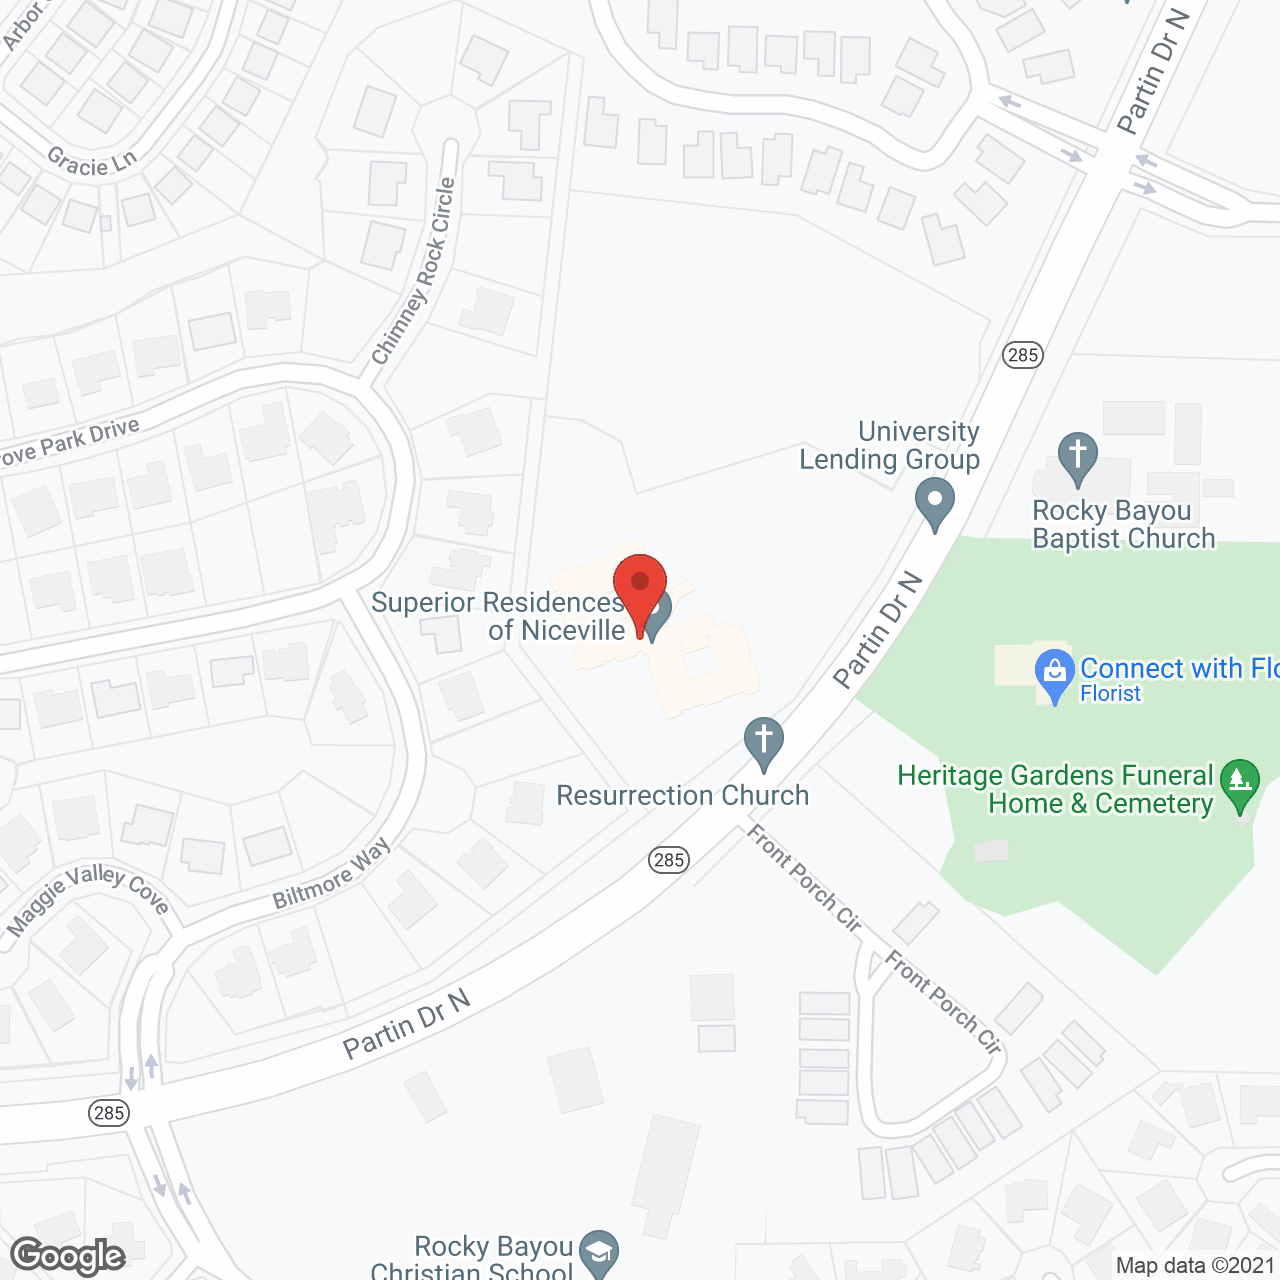 Superior Residences of Niceville in google map